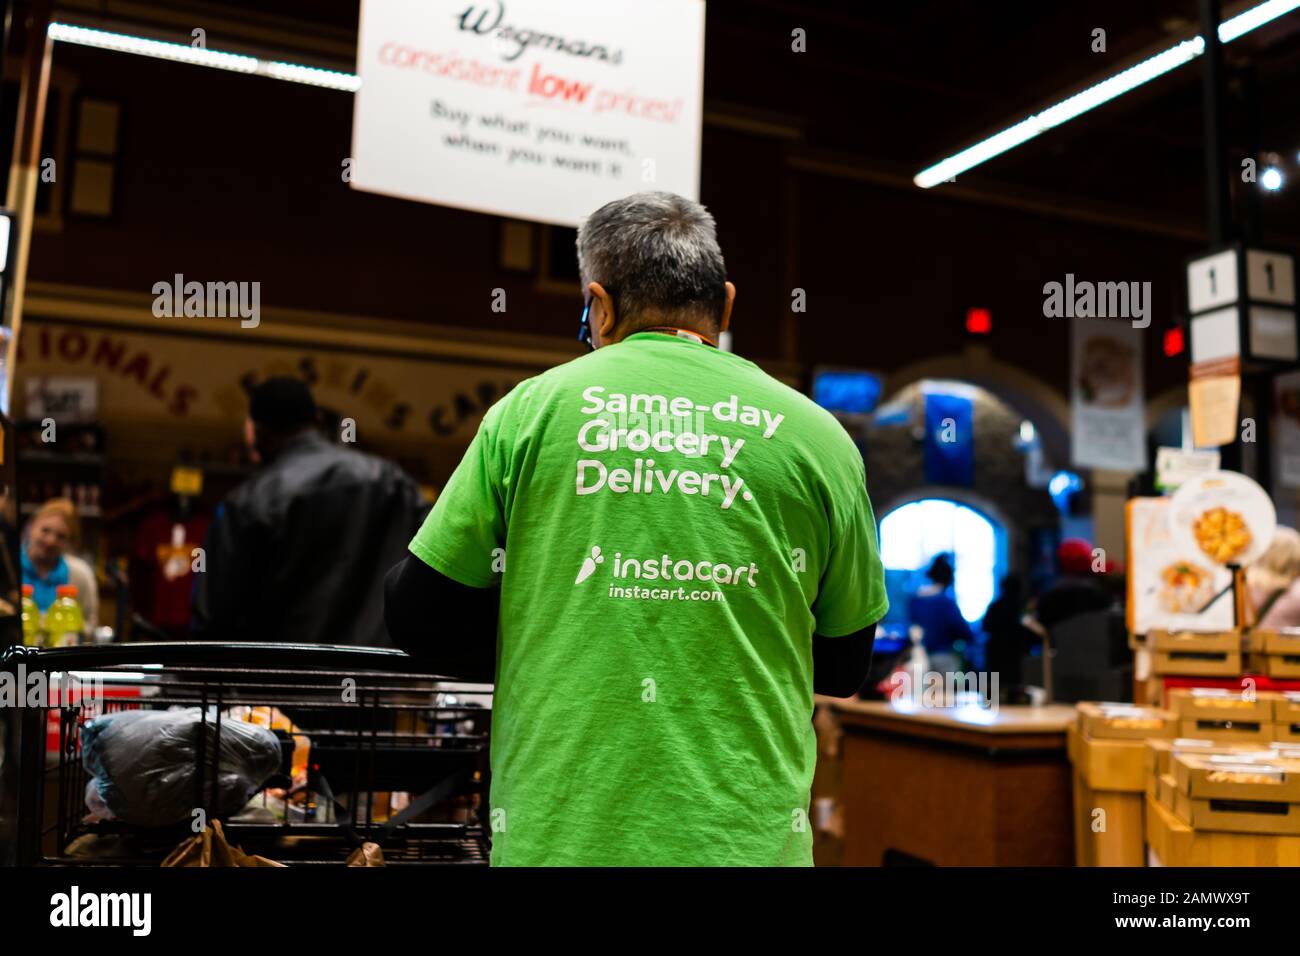 Fairfax, USA - December 5, 2019: Wegmans grocery store interior with Instacart man worker and sign on shirt for same-day delivery Stock Photo